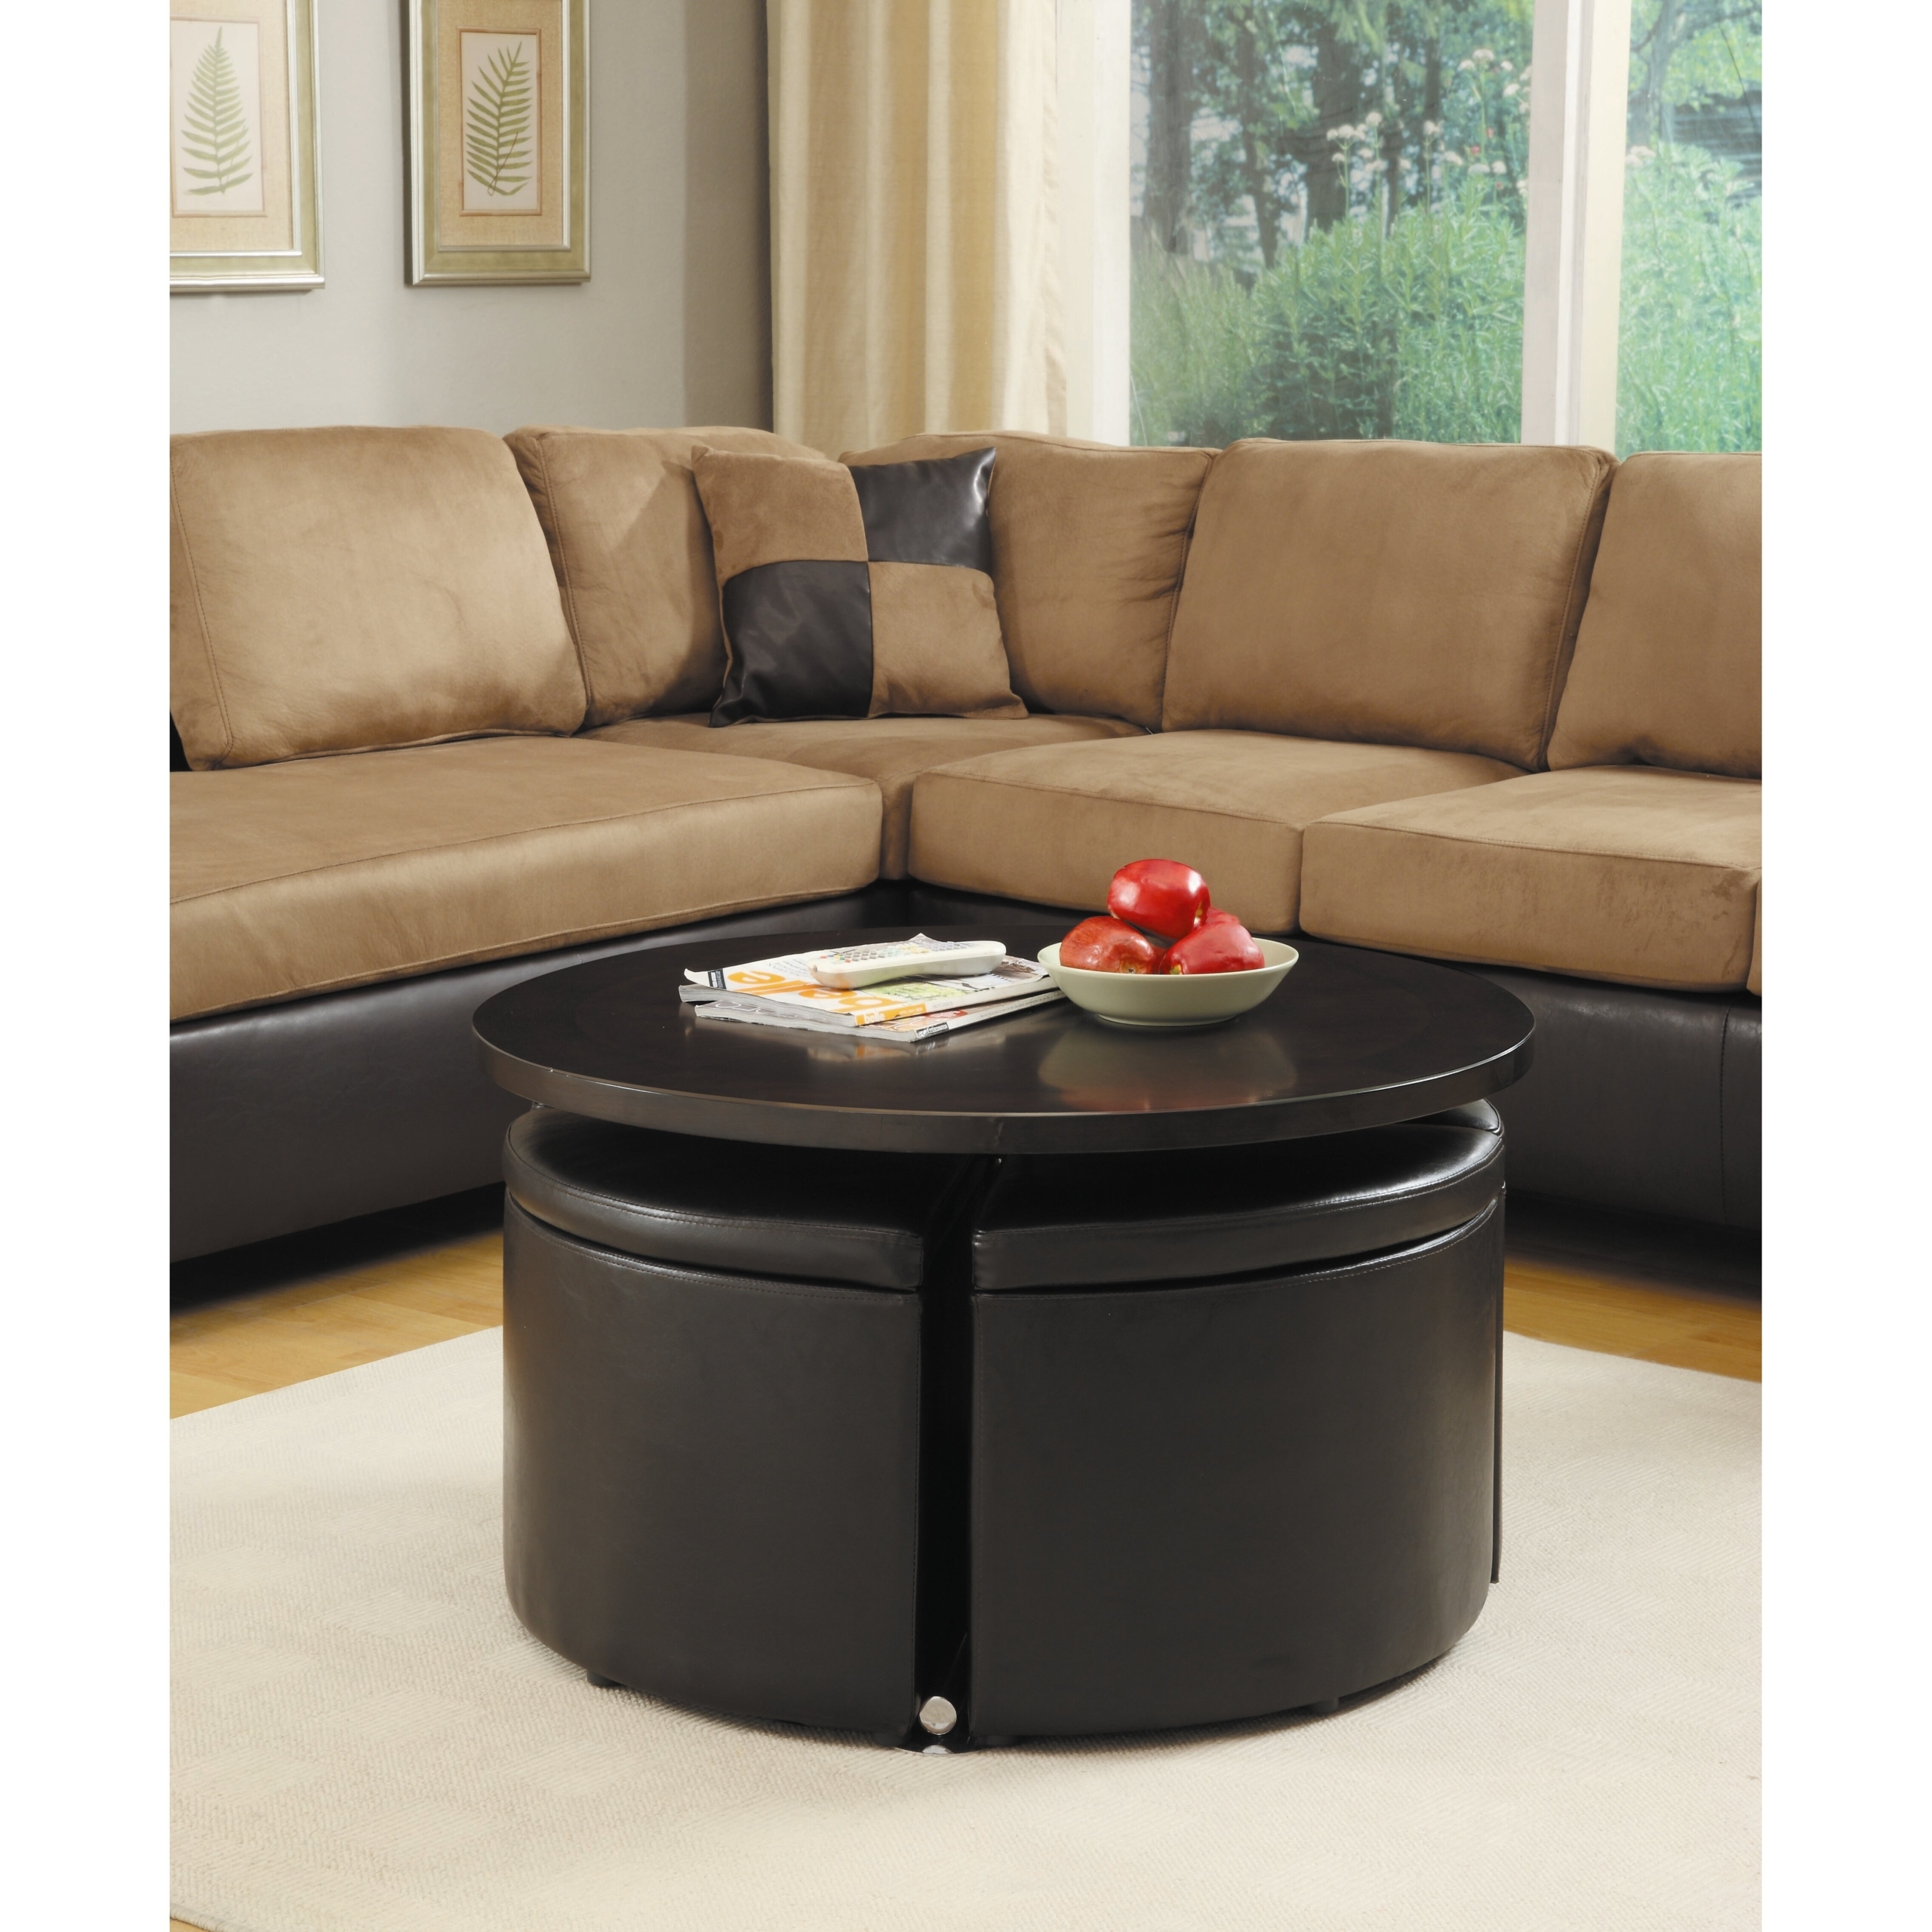 Round Ottoman Coffee Table With Storage - Foter